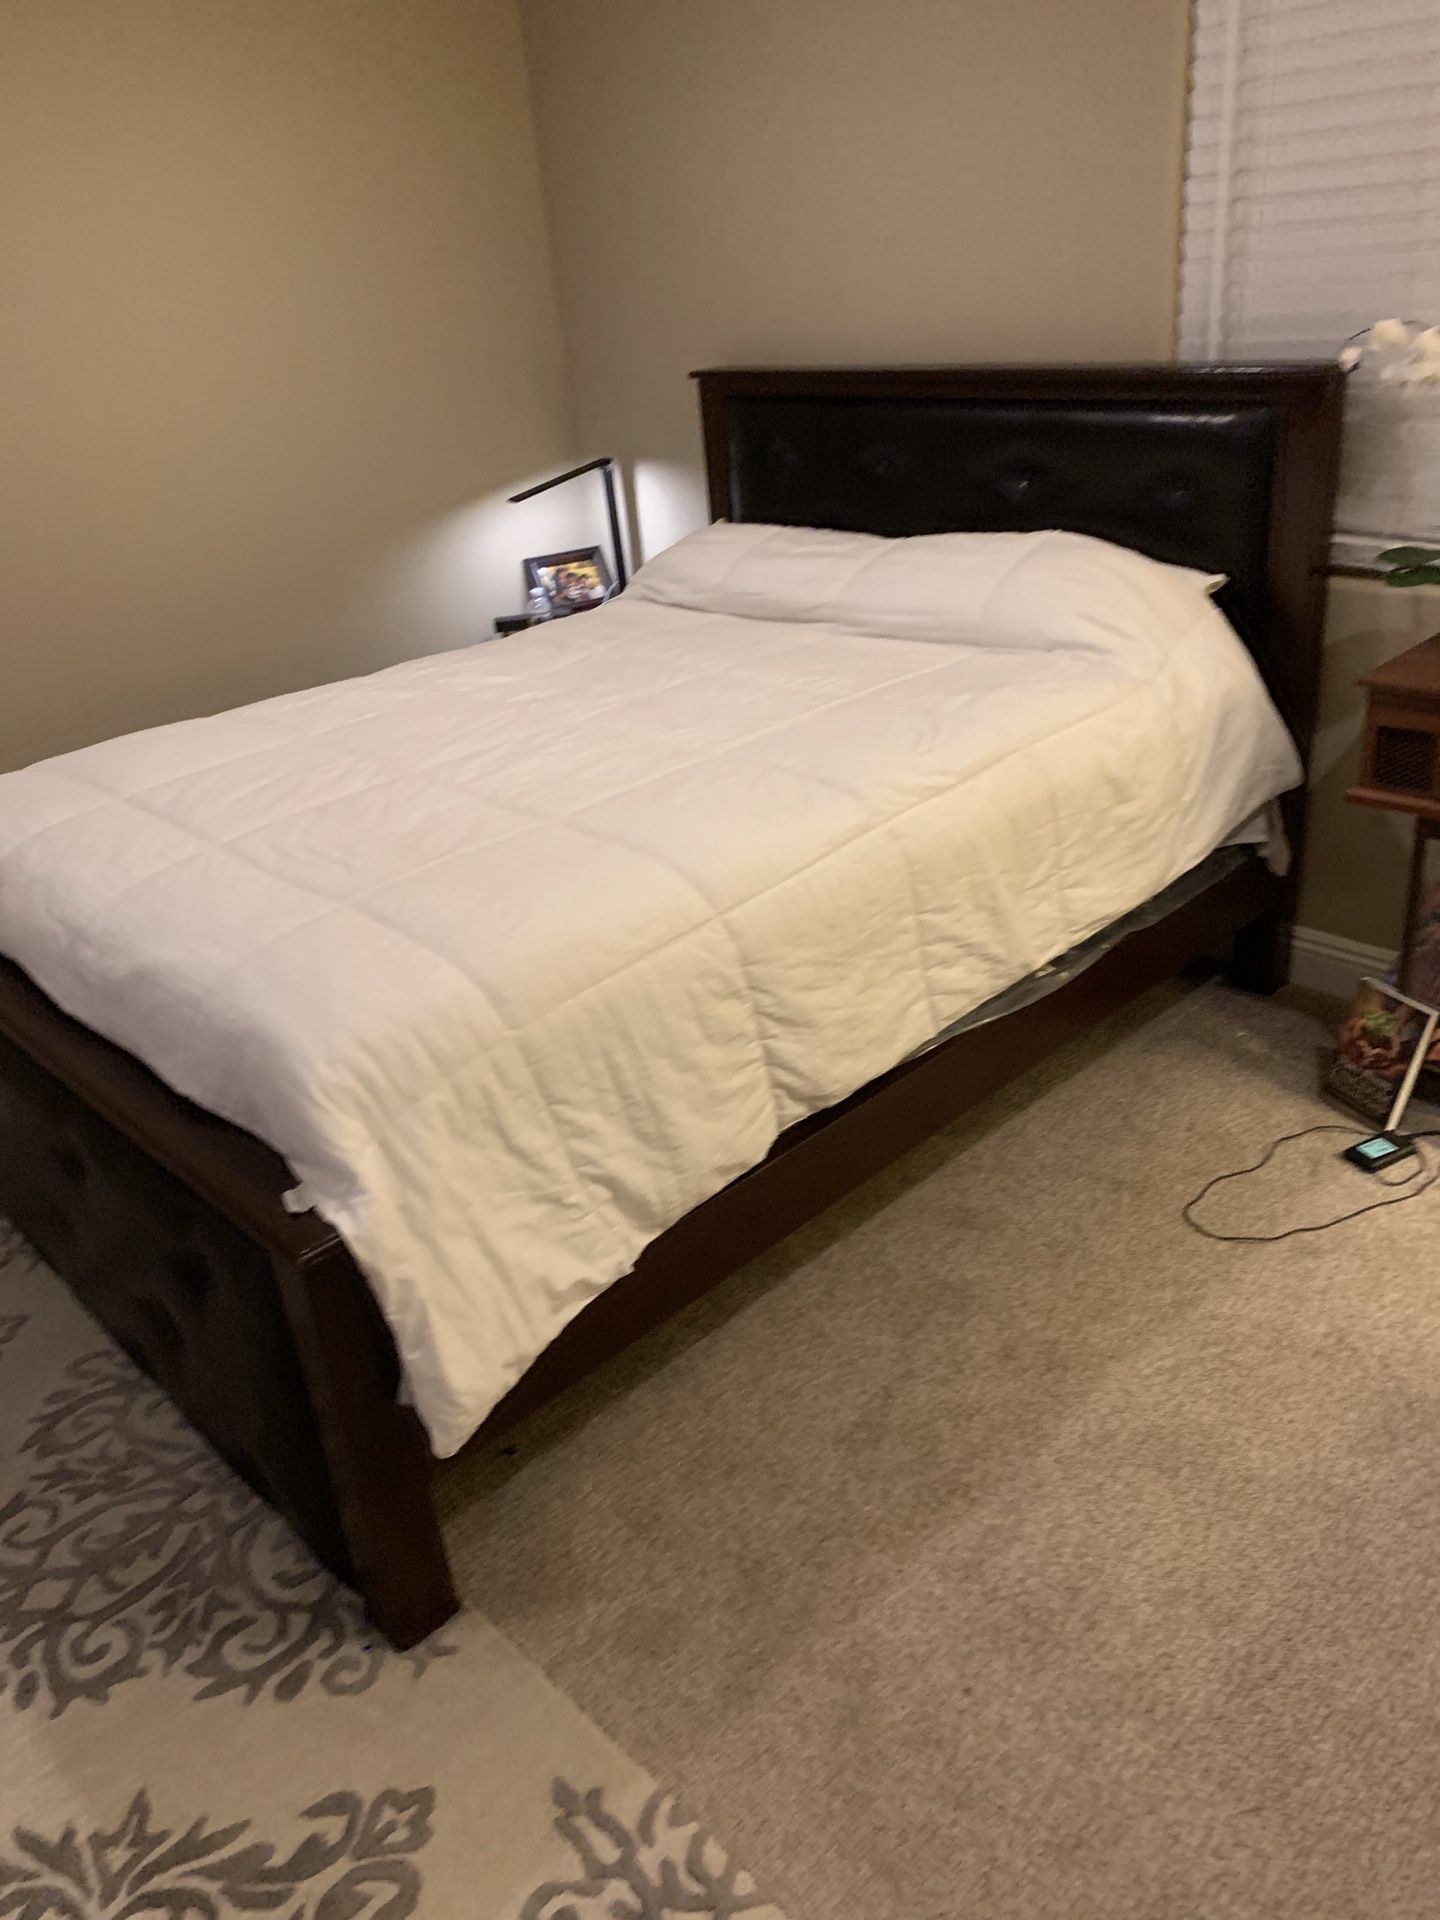 Queen sized Bedroom set (Bed, mattress, box spring and 1 night stand)